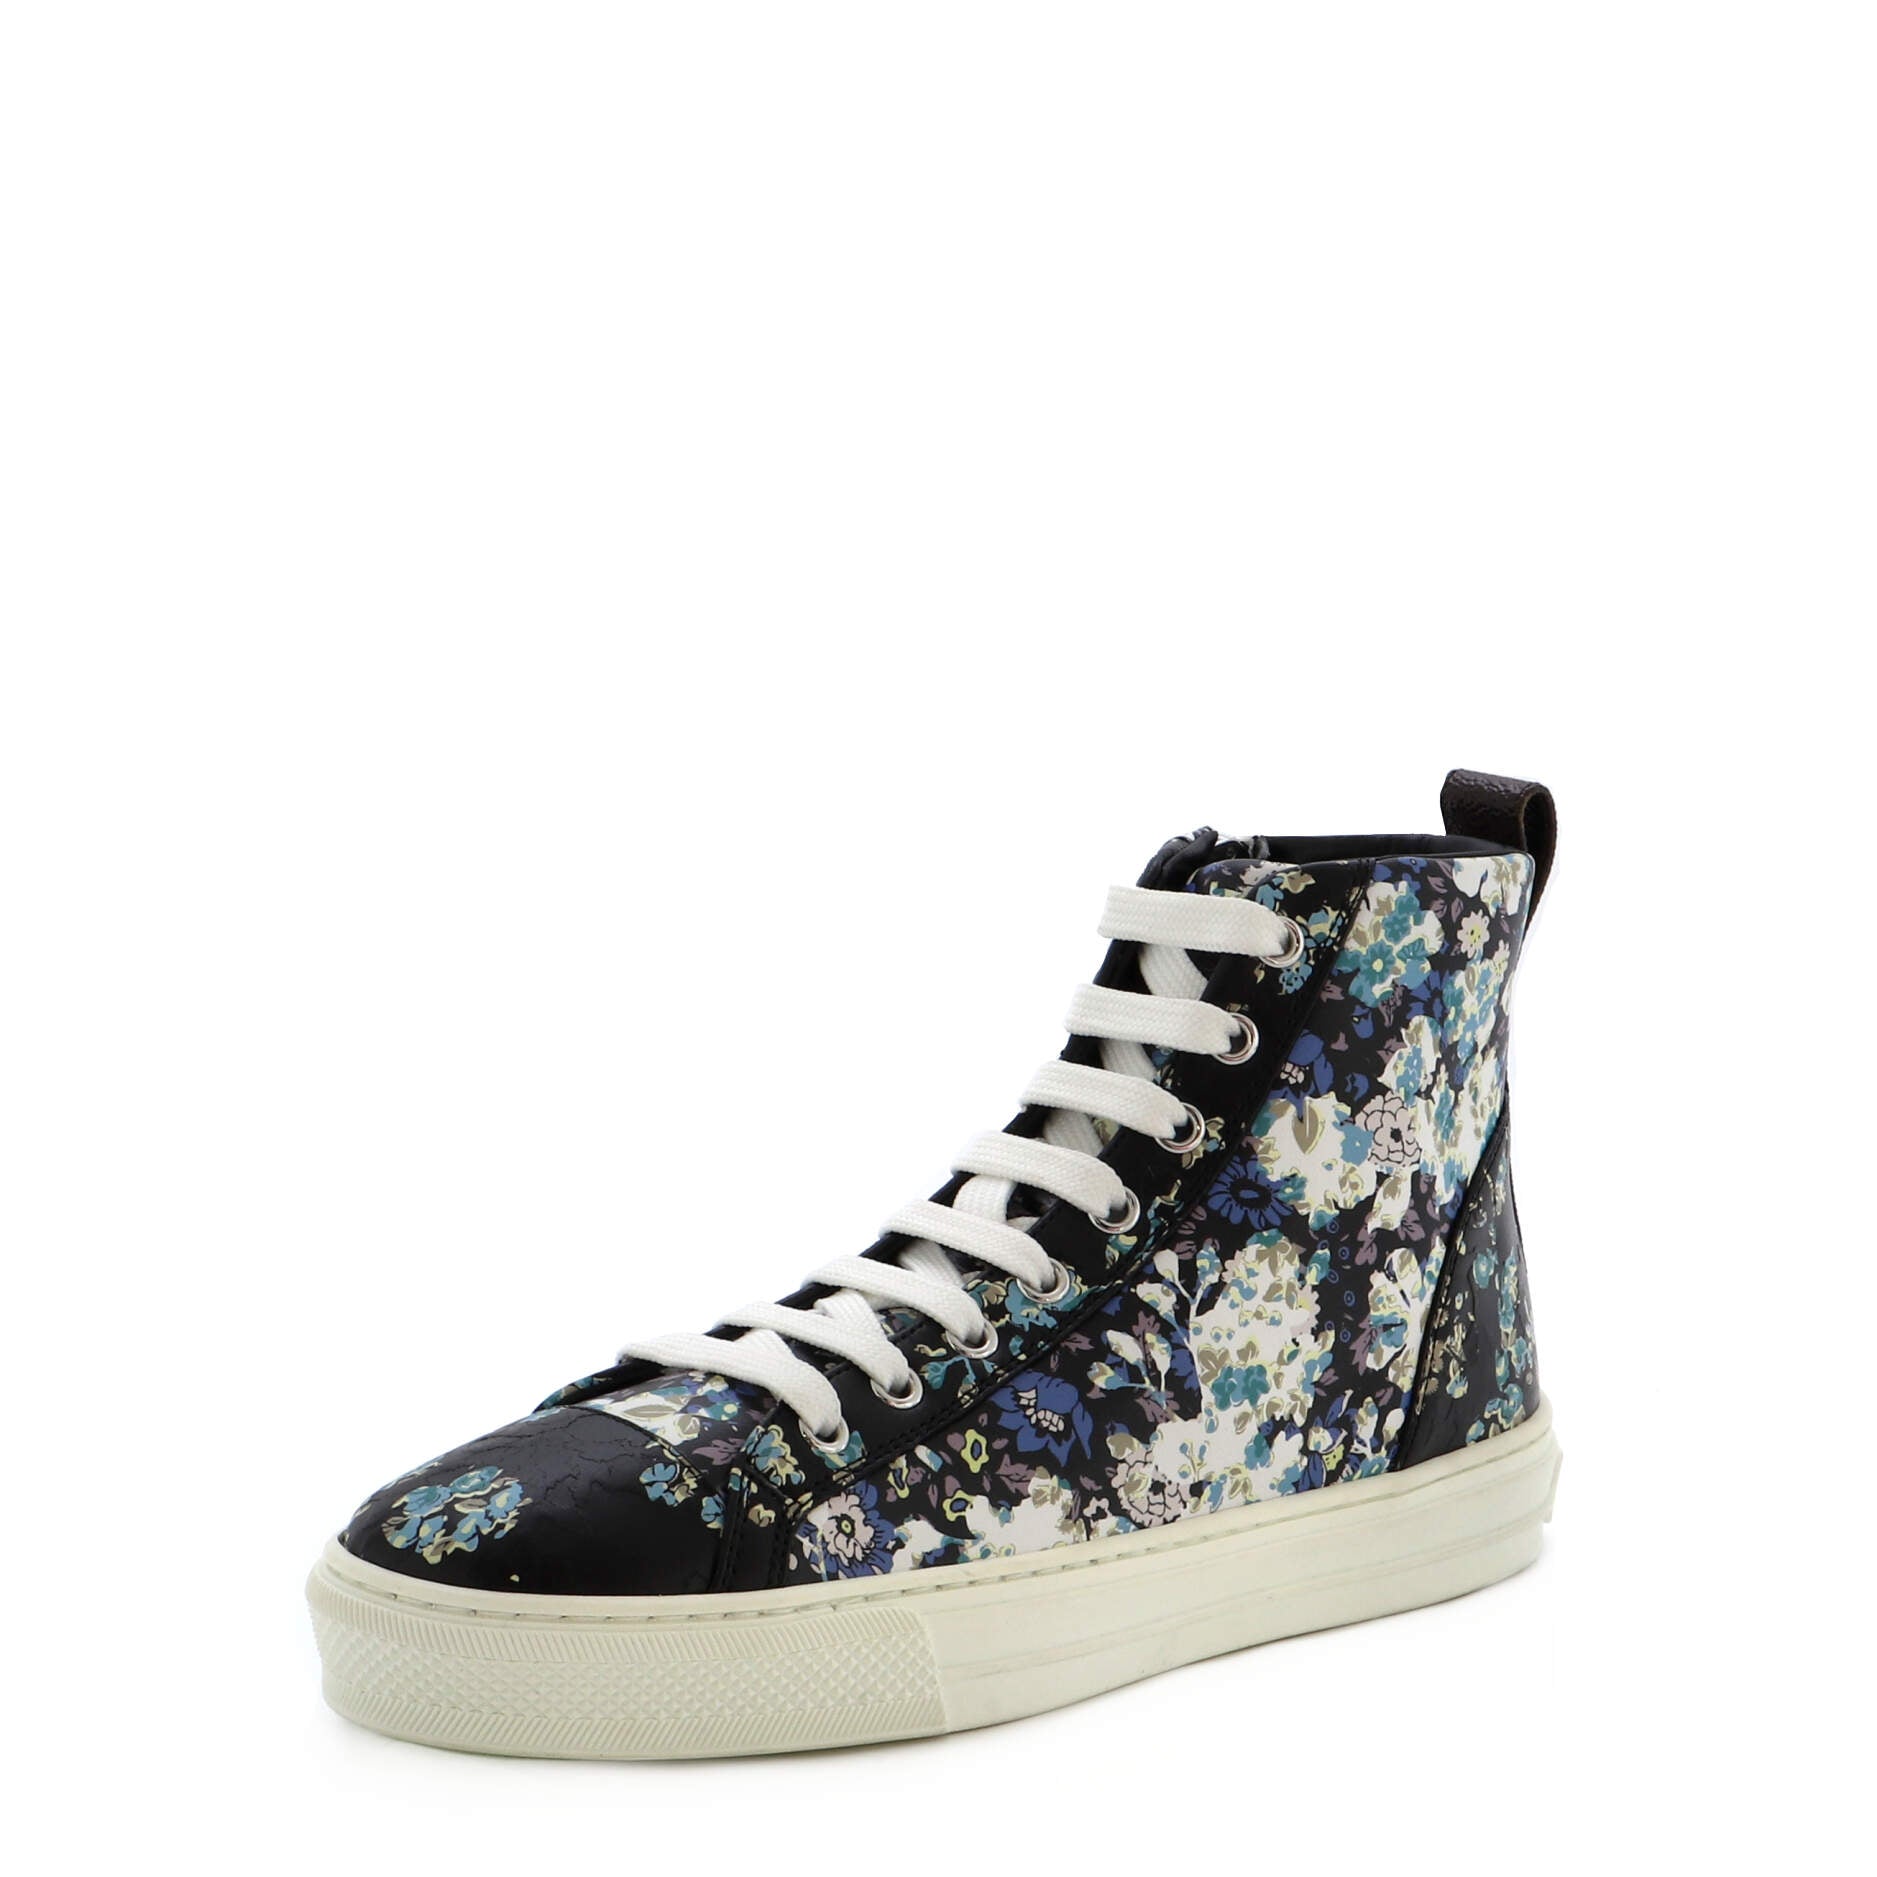 Women's Zip Up Sneaker Boots Floral Printed Leather